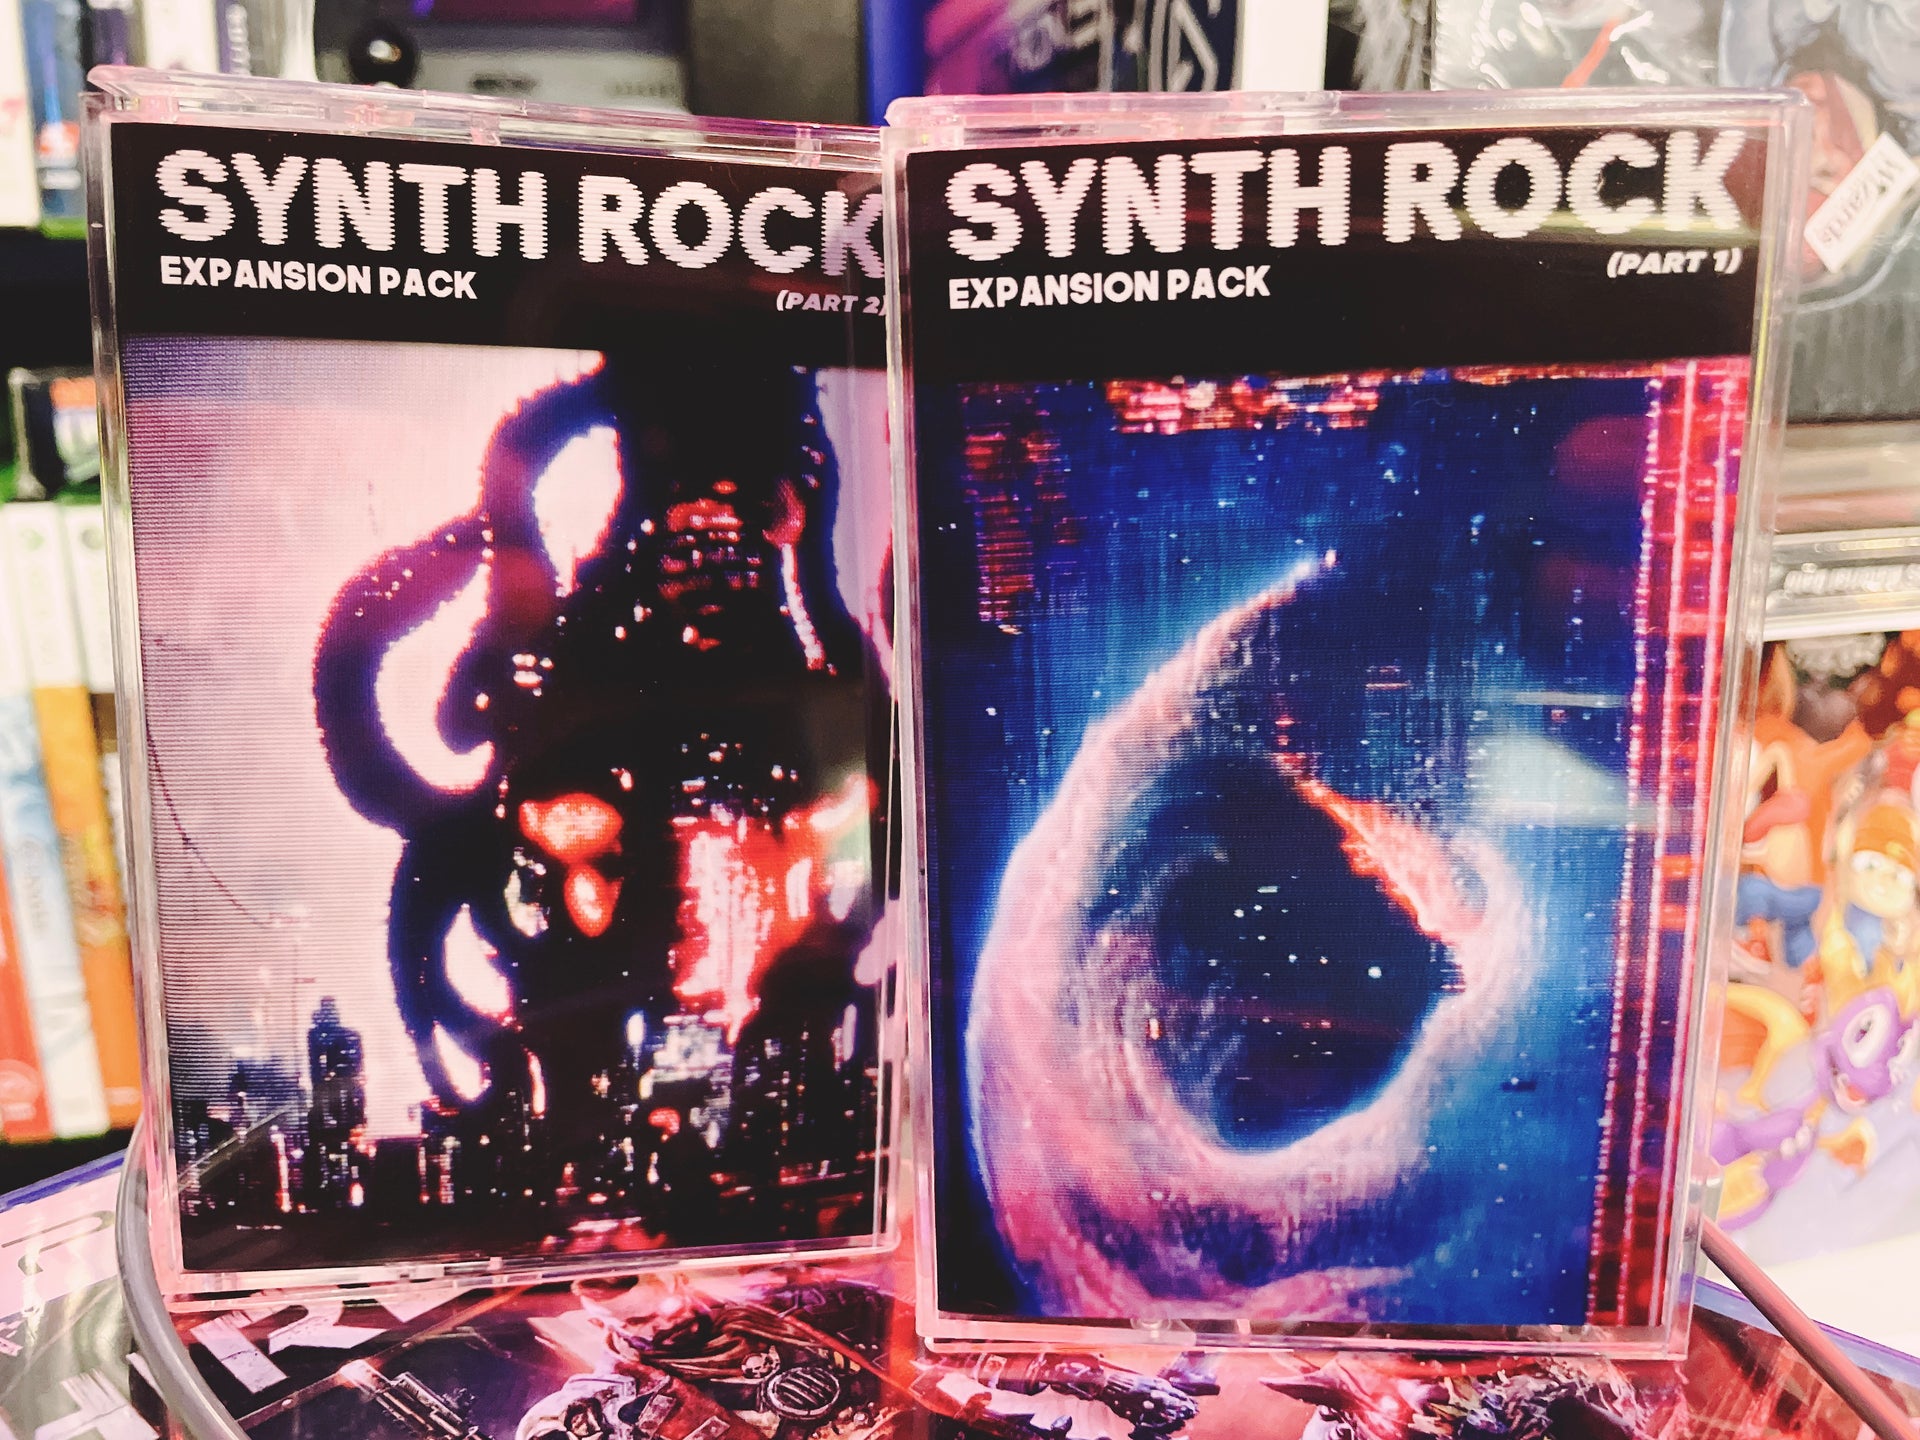 Synth Rock Expansion Pack (Vol. 1+2) Cassette Tape USB Dual Pack - Backing Track Bootlegs